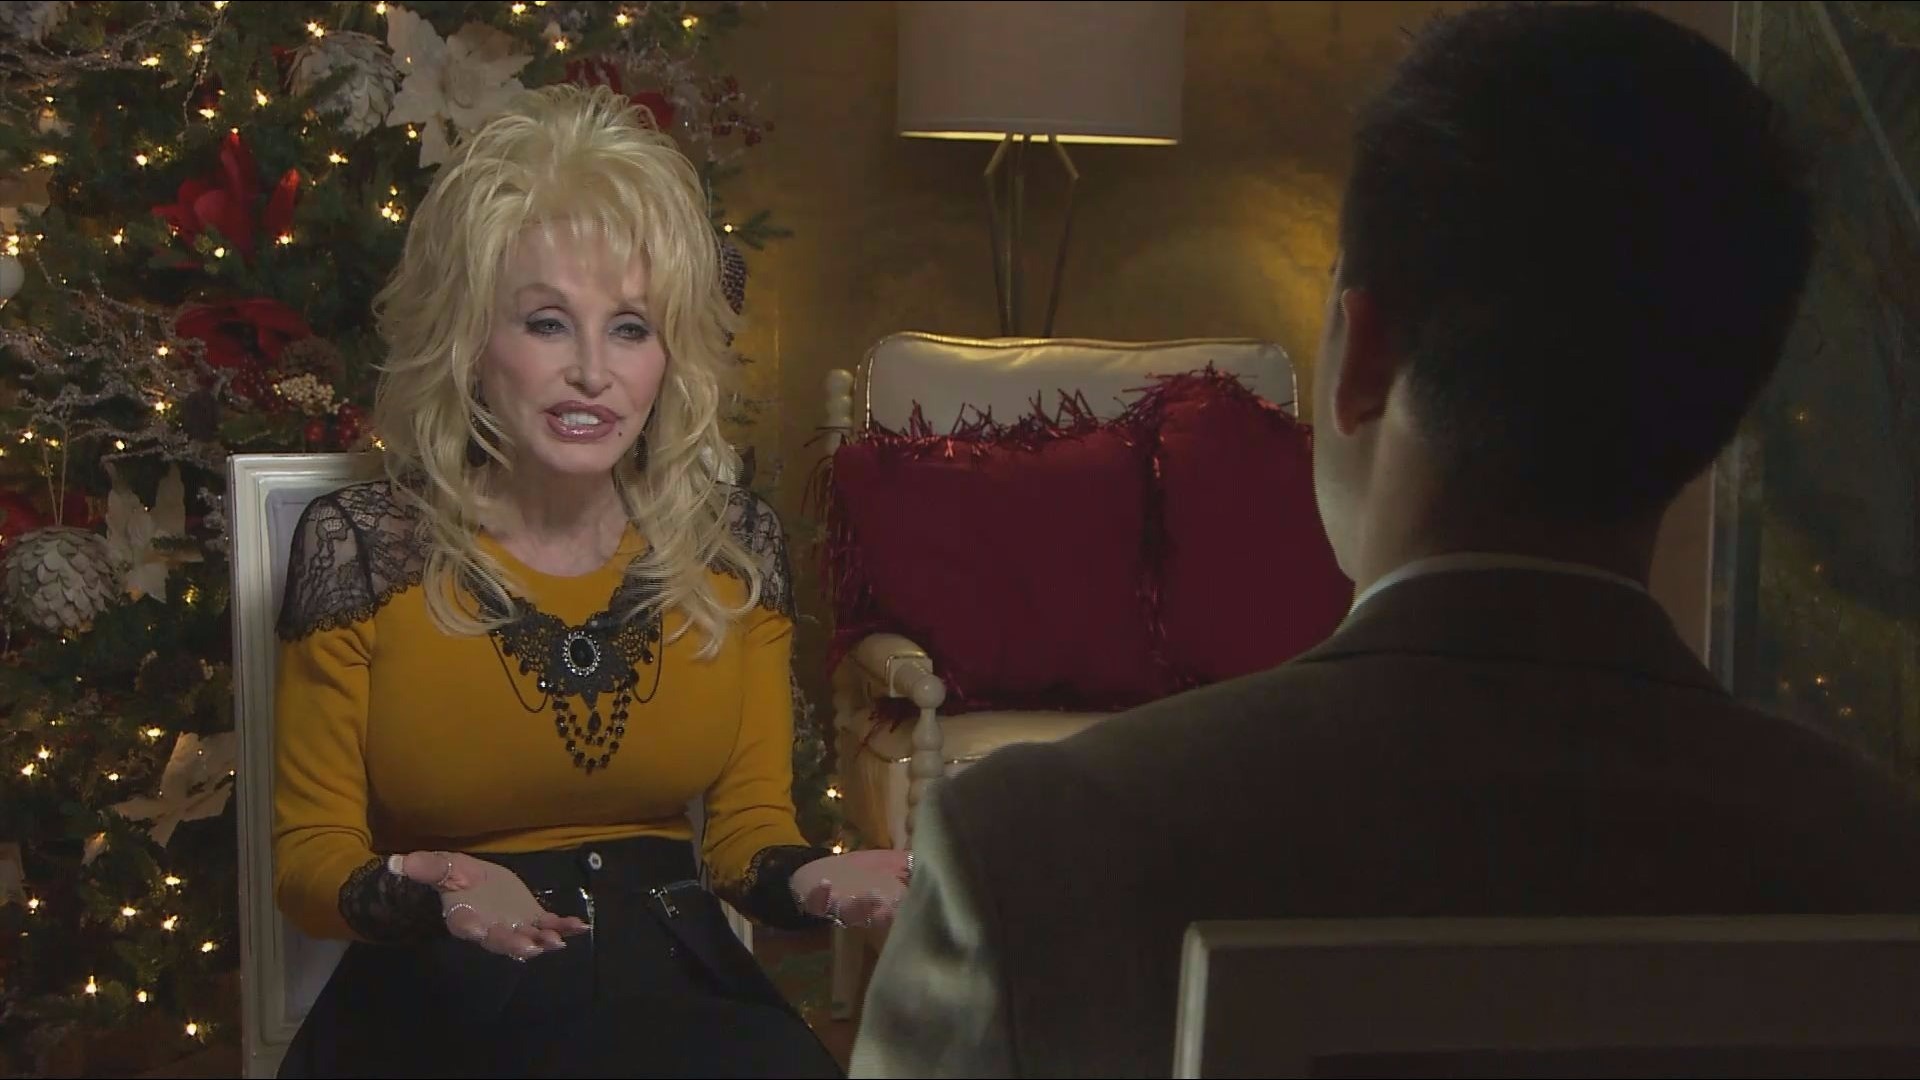 Dolly Parton is still unstoppable in pop culture at 73 years young.